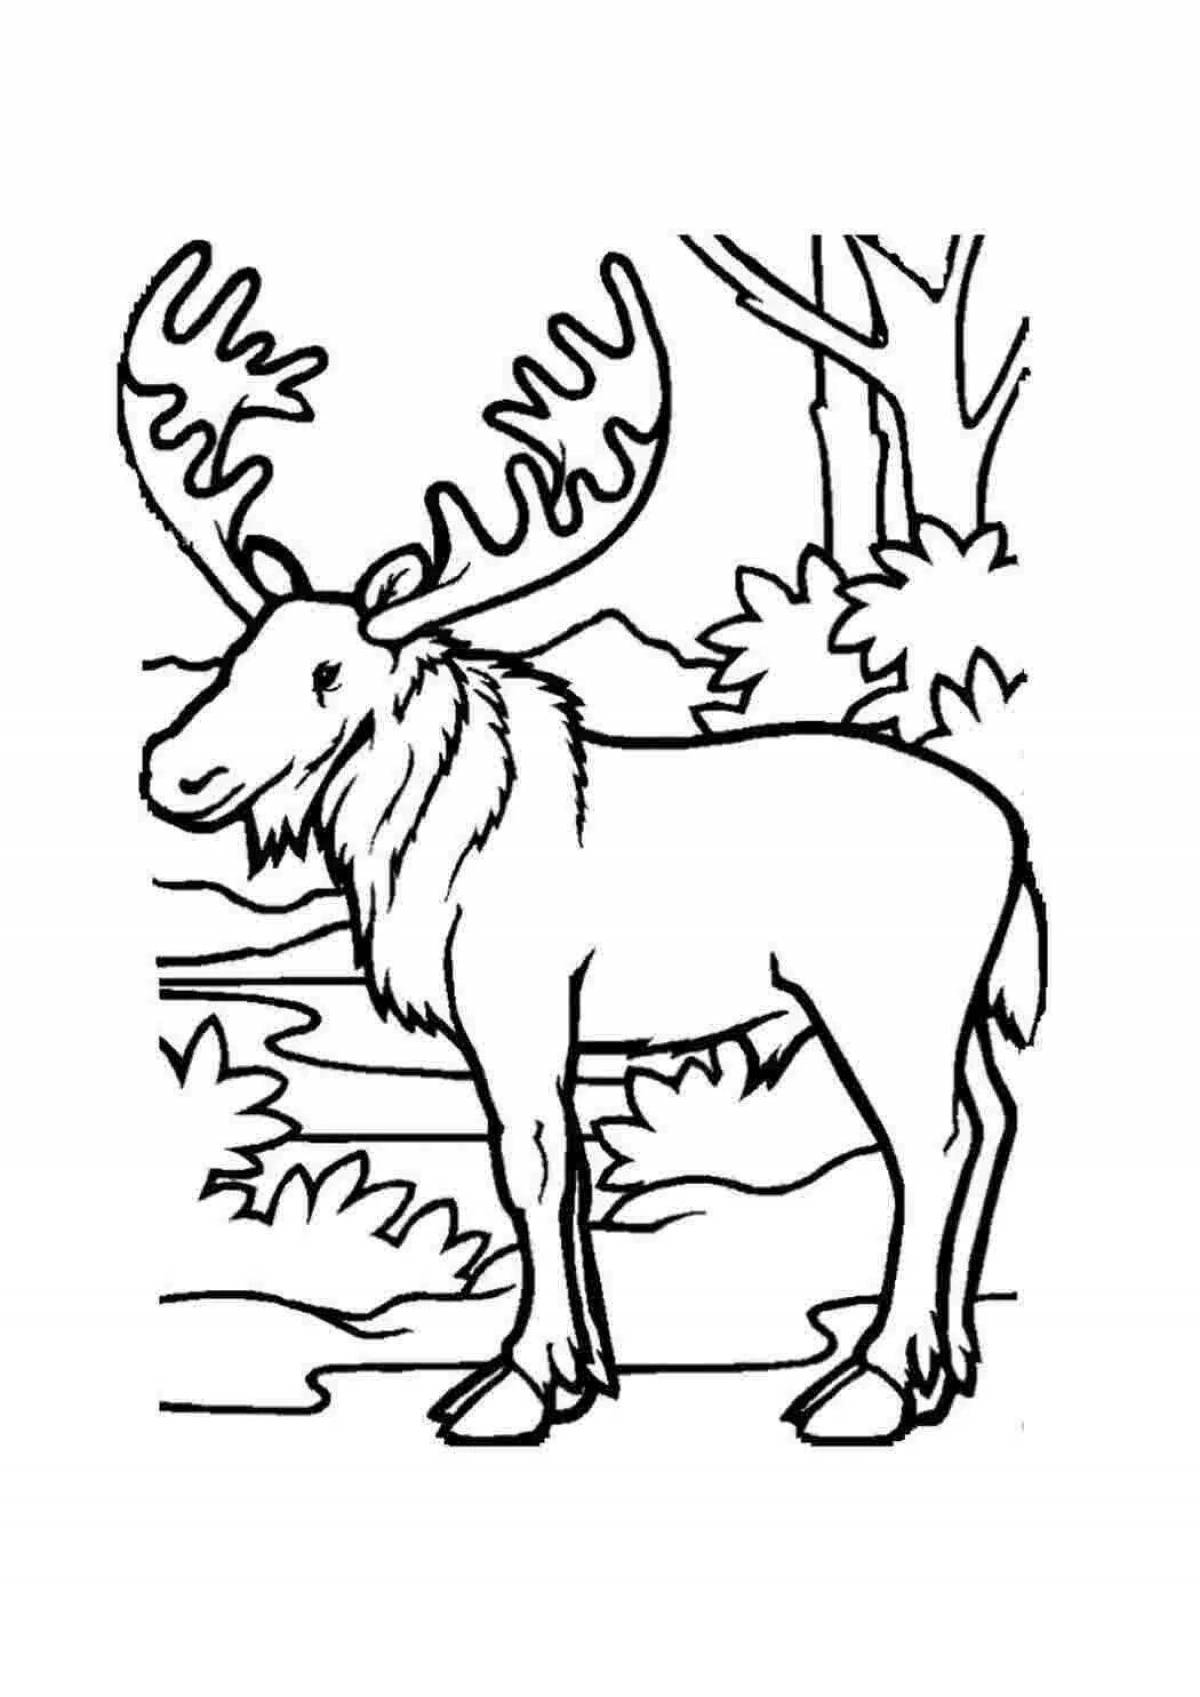 Fun coloring pages of forest animals for 4-5 year olds